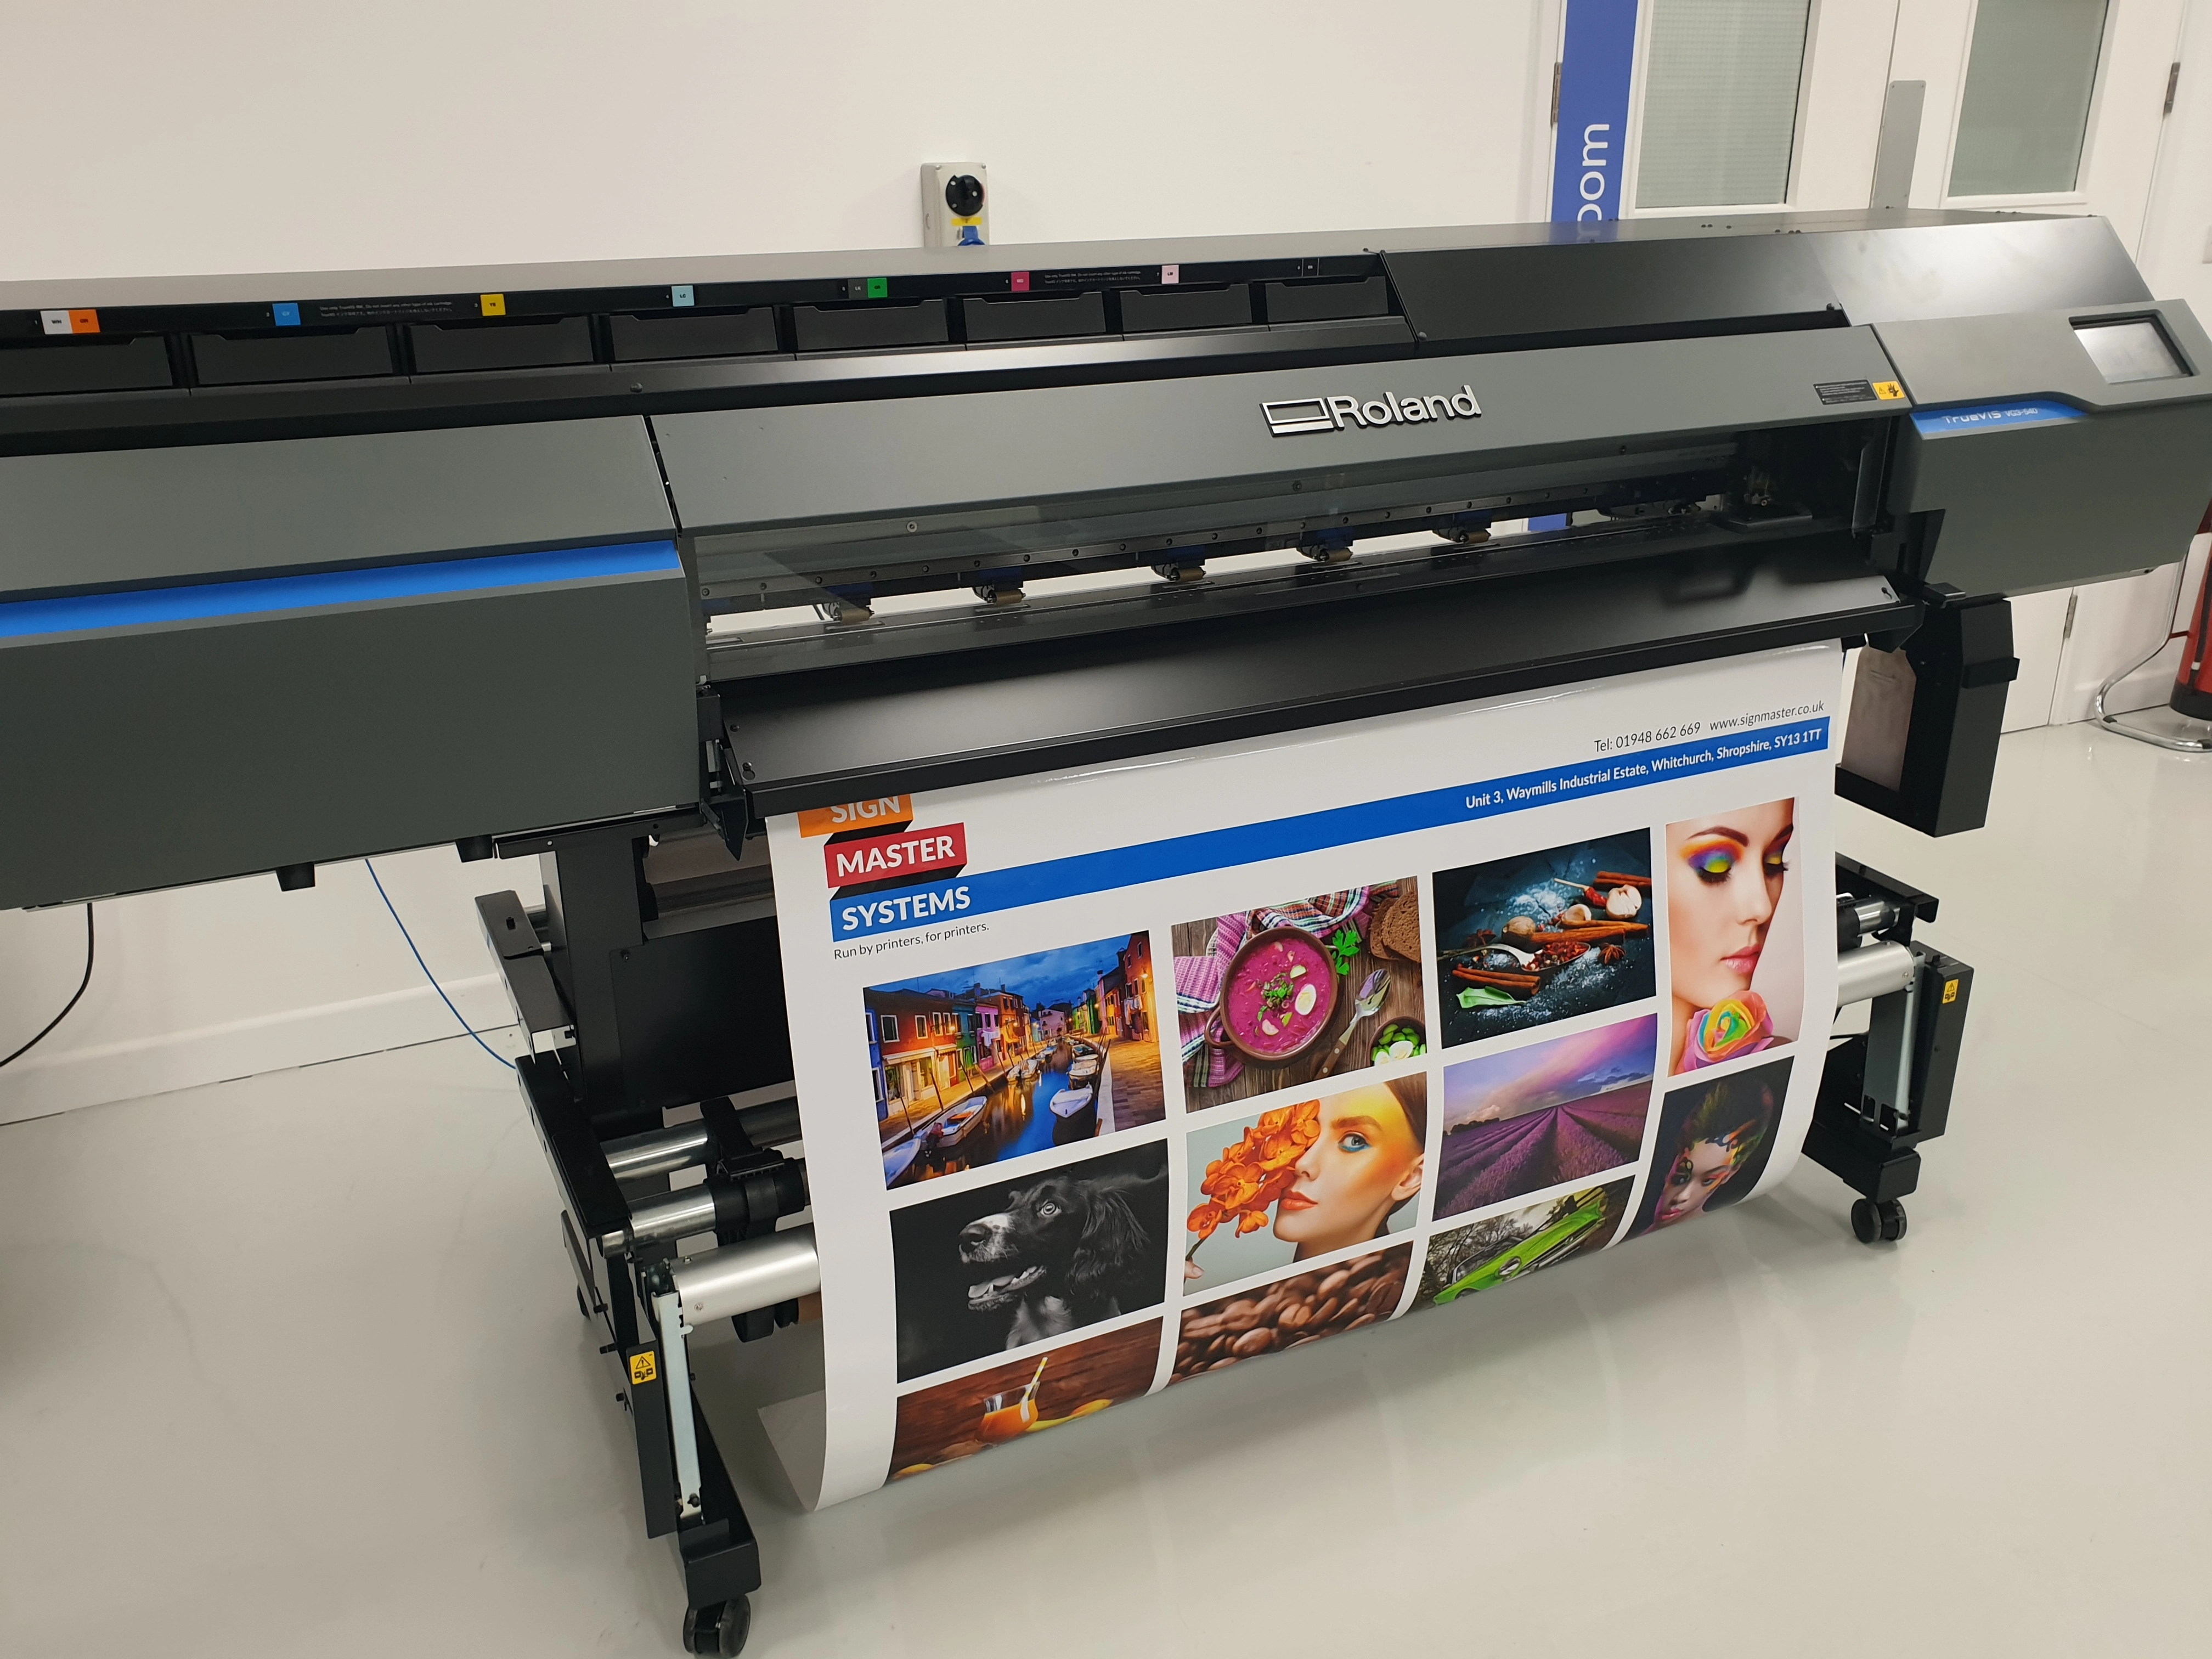 A close up of the Roland VG3 printer in use to show why its a must have for your printing business